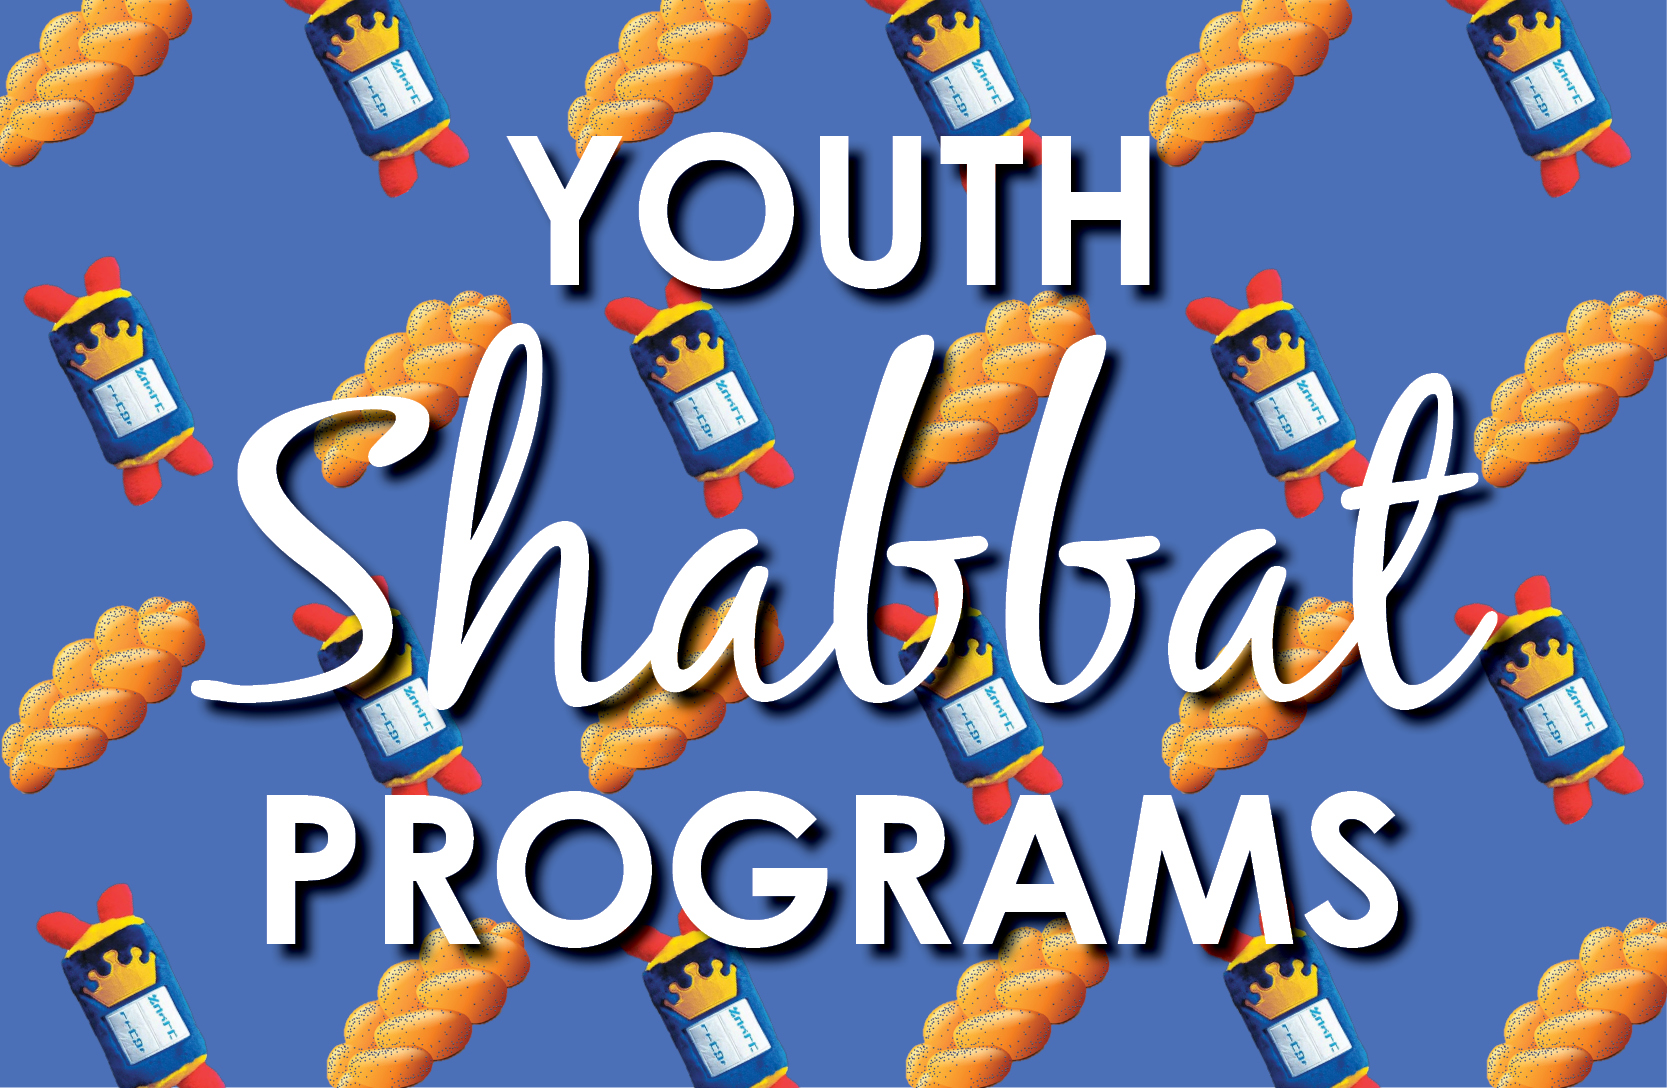 Youth Shabbat Programming - On the Roof!